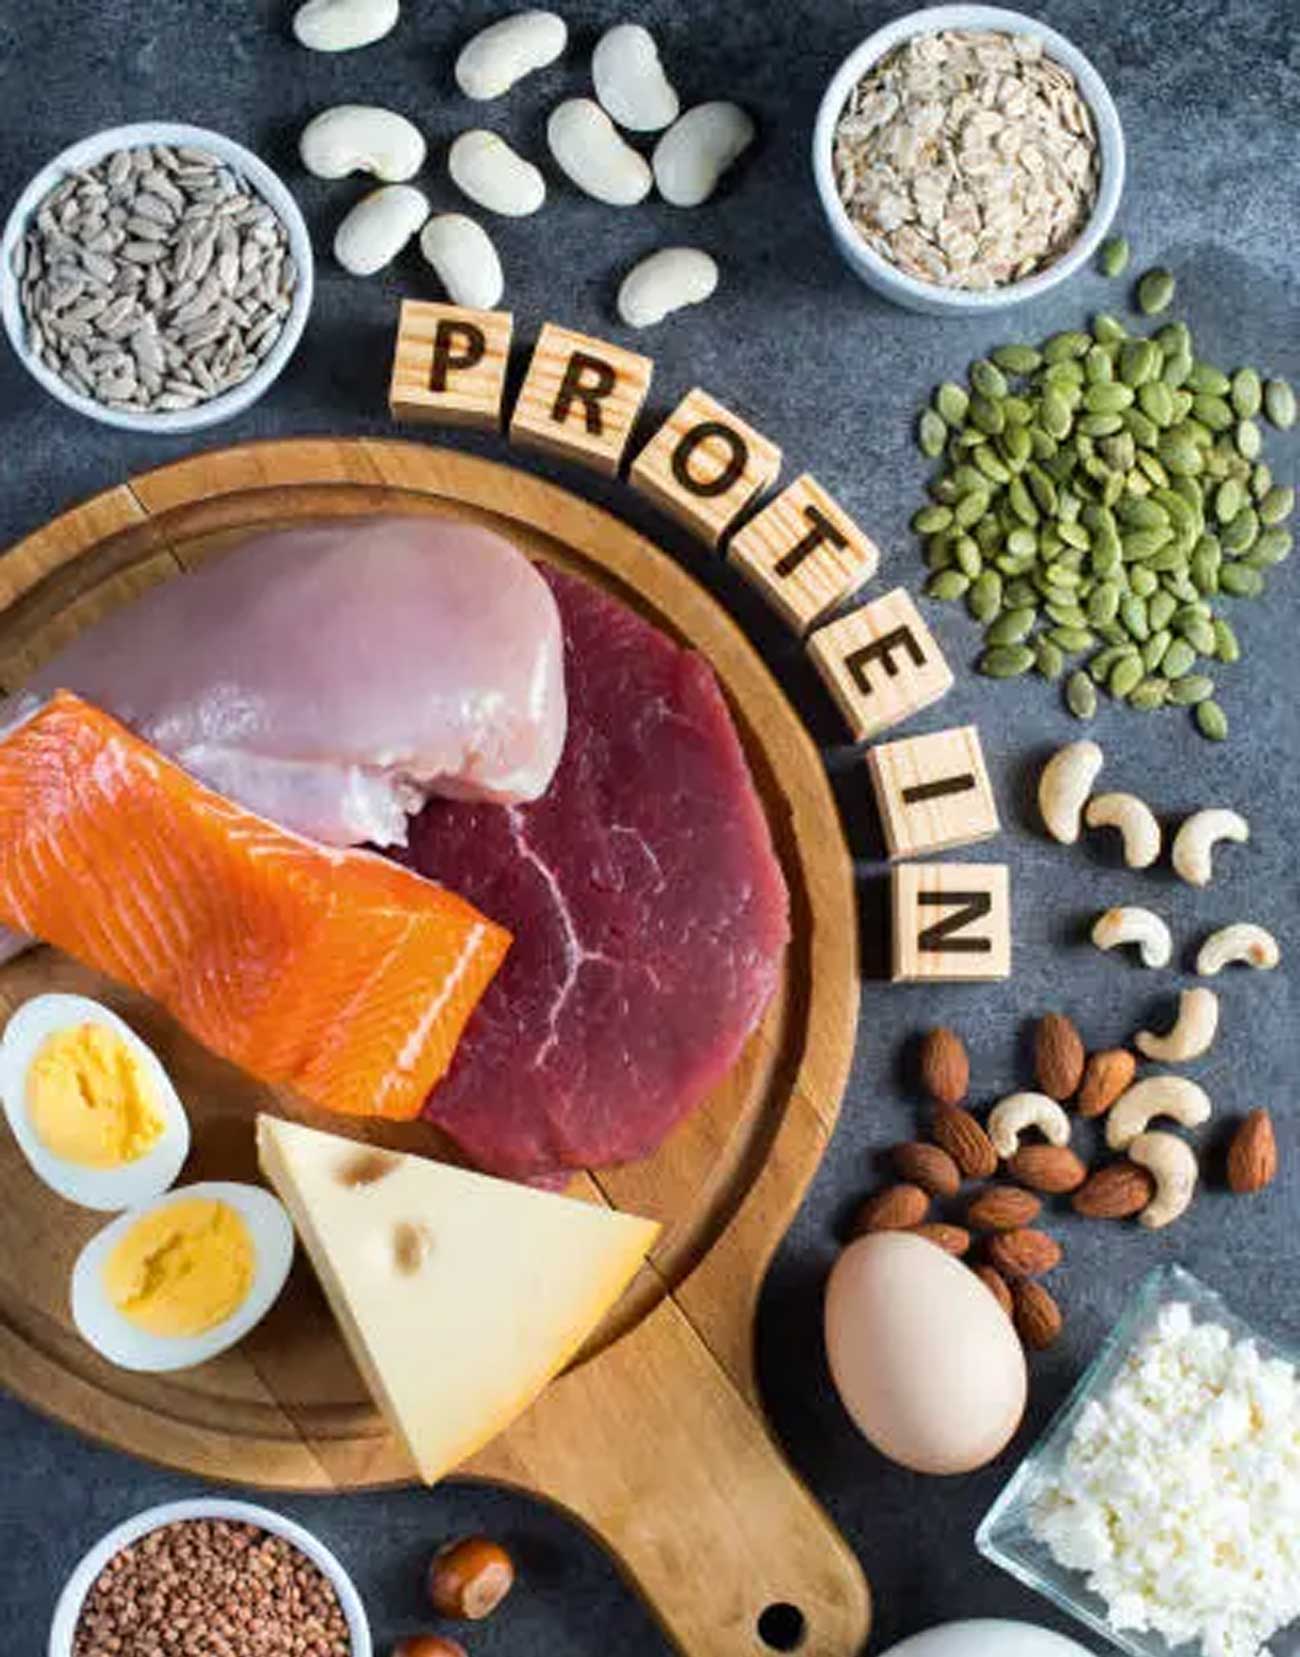 10 Delicious High Protein Low Carb Meals to Fuel Your Healthy Lifestyle